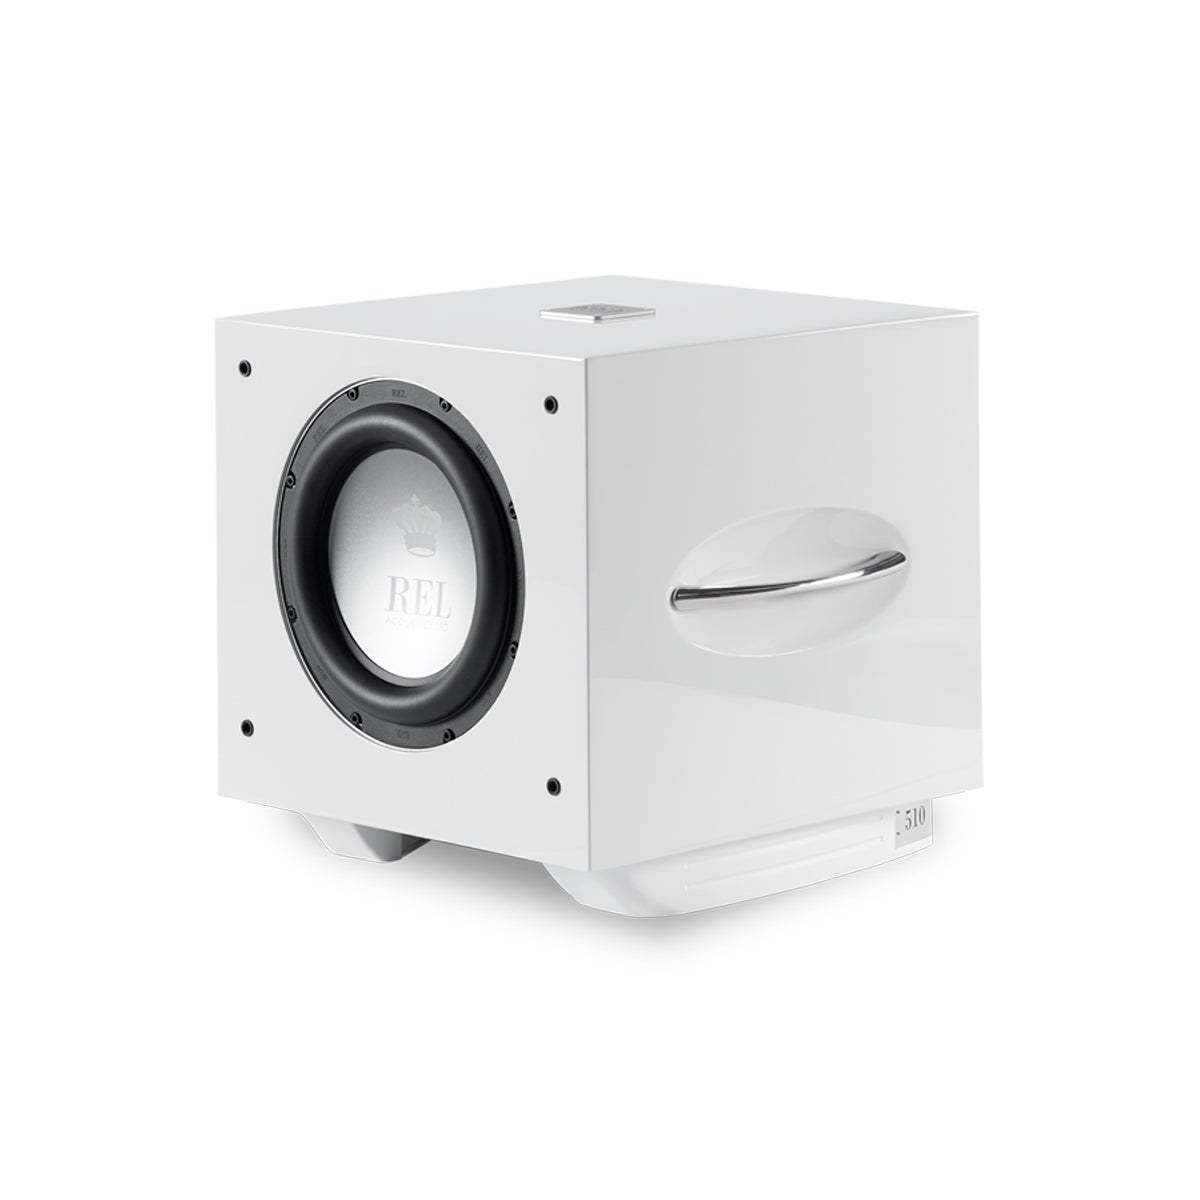 REL Series S510 10" Active Subwoofer - The Audio Experts